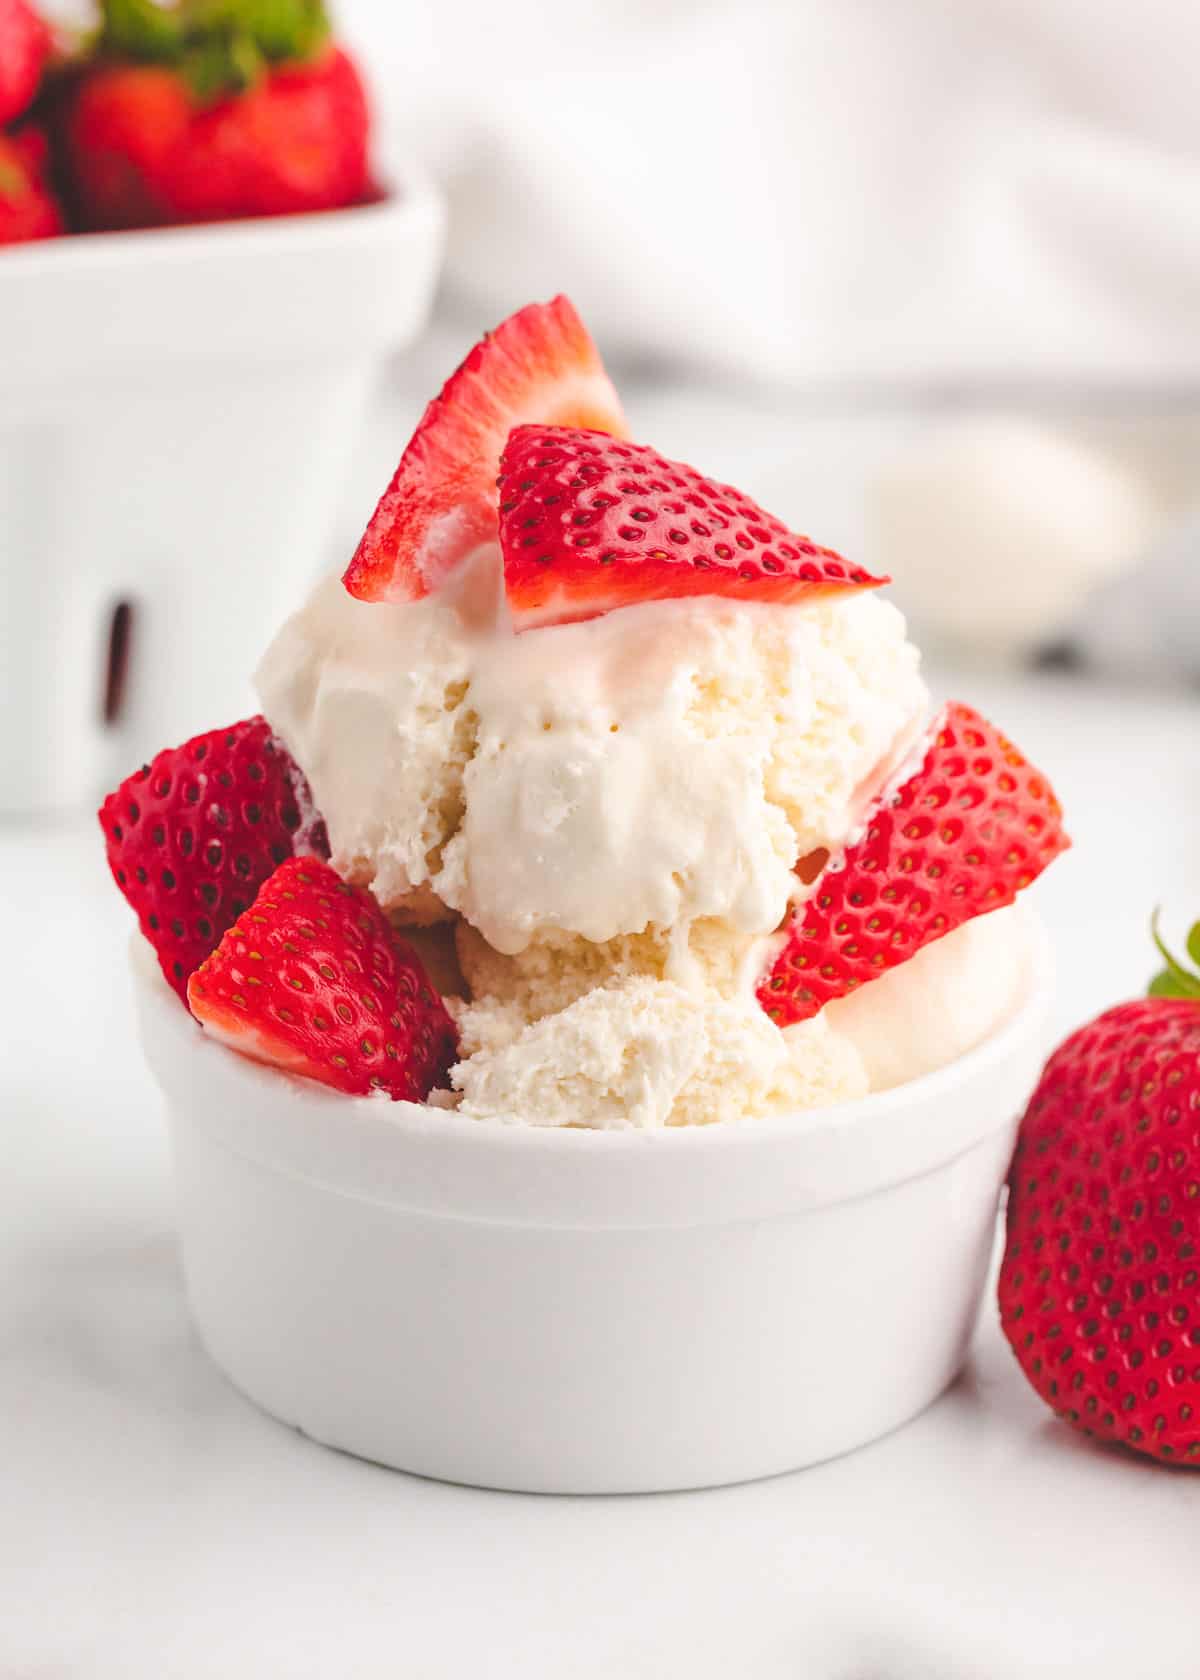 Vanilla ice cream in a white bowl with sliced strawberries on top.